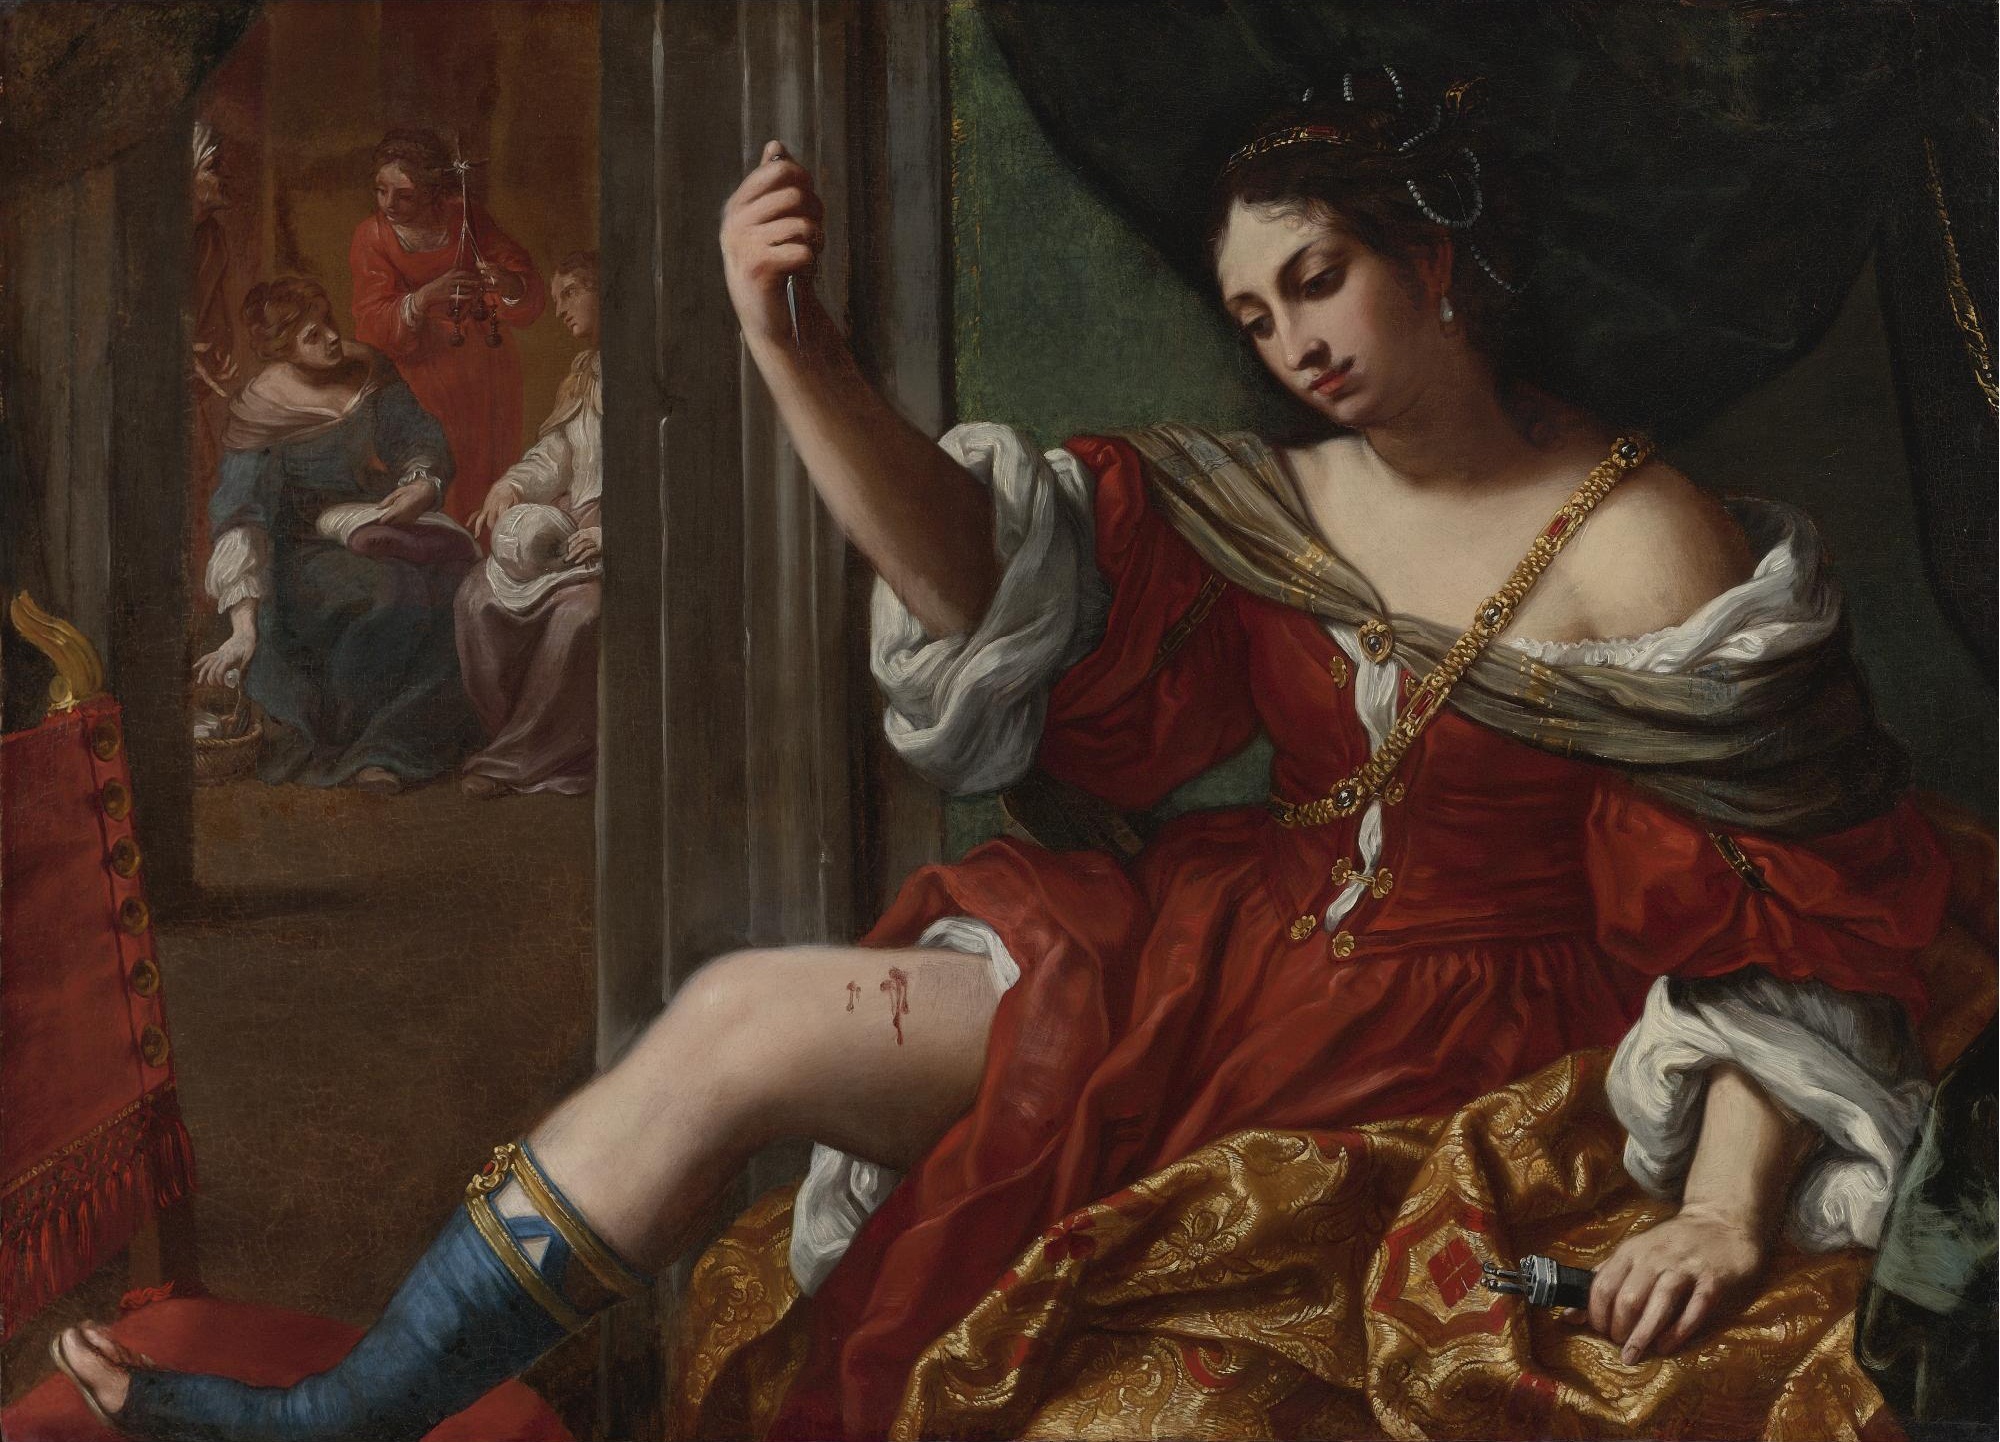 Portia Wounding Her Thigh by Elisabetta Sirani - 1664 - 101 x 138 cm private collection